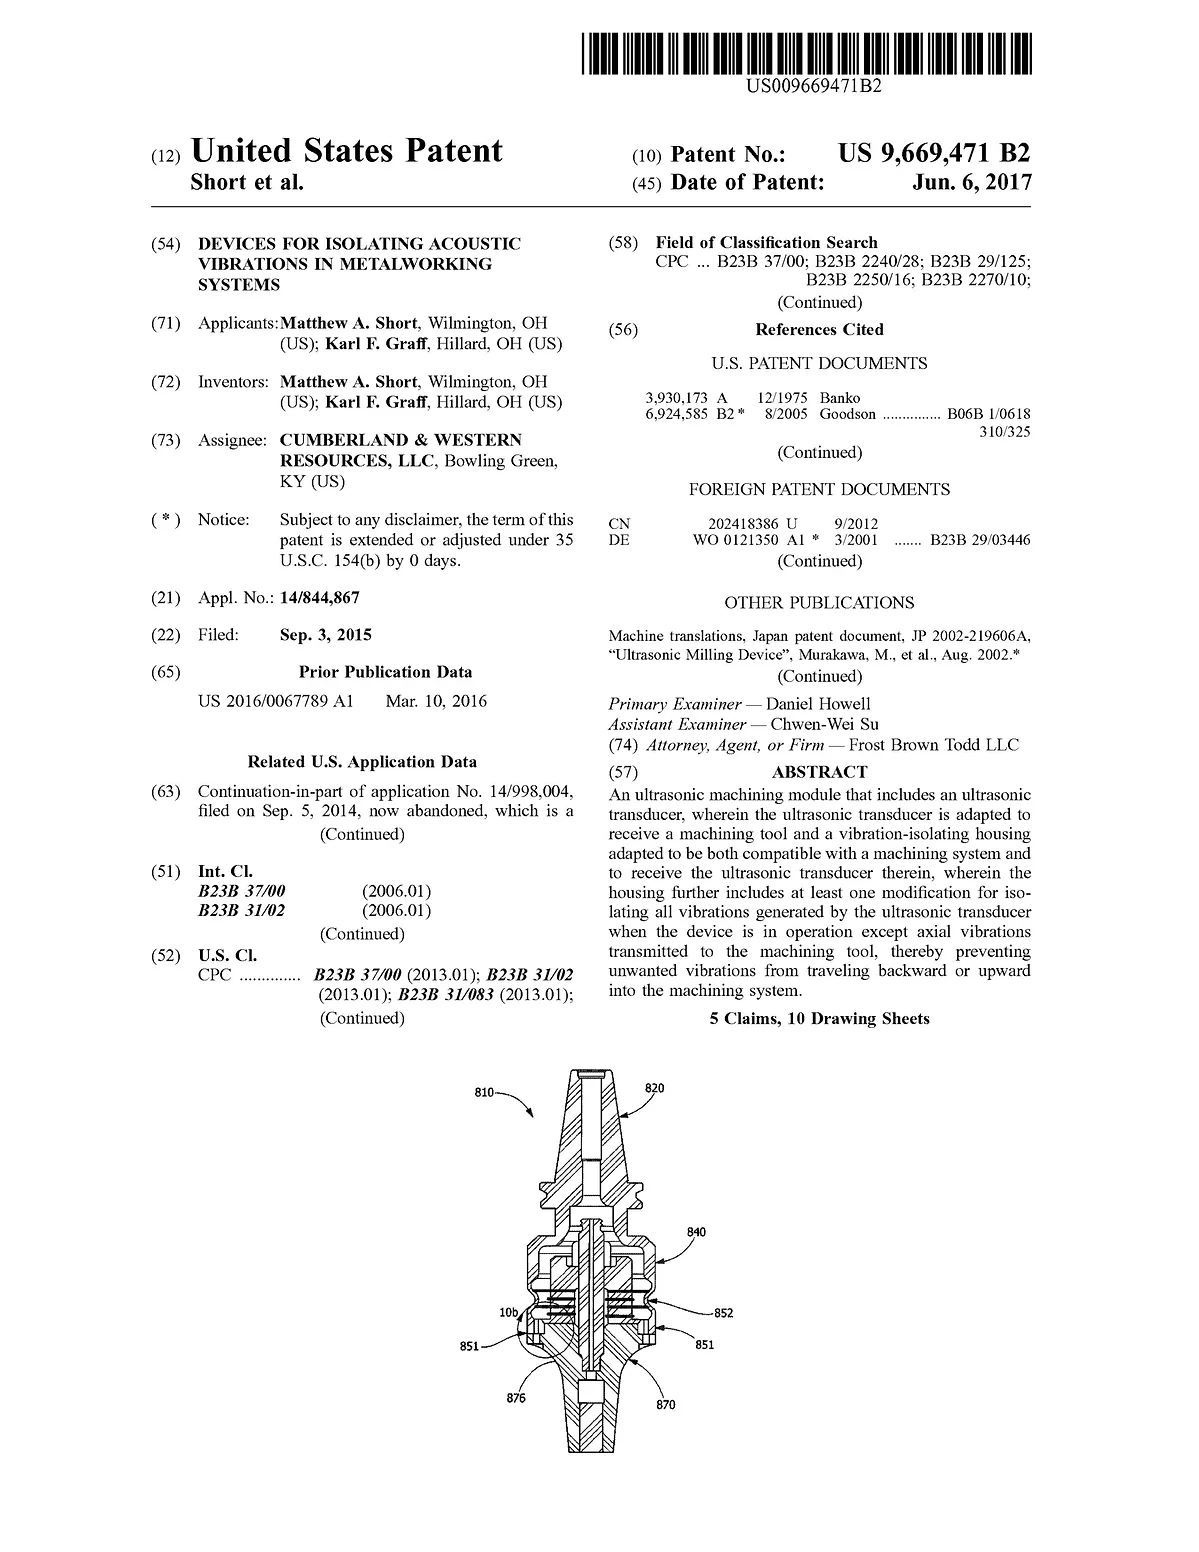 Mechanical Systems Patents